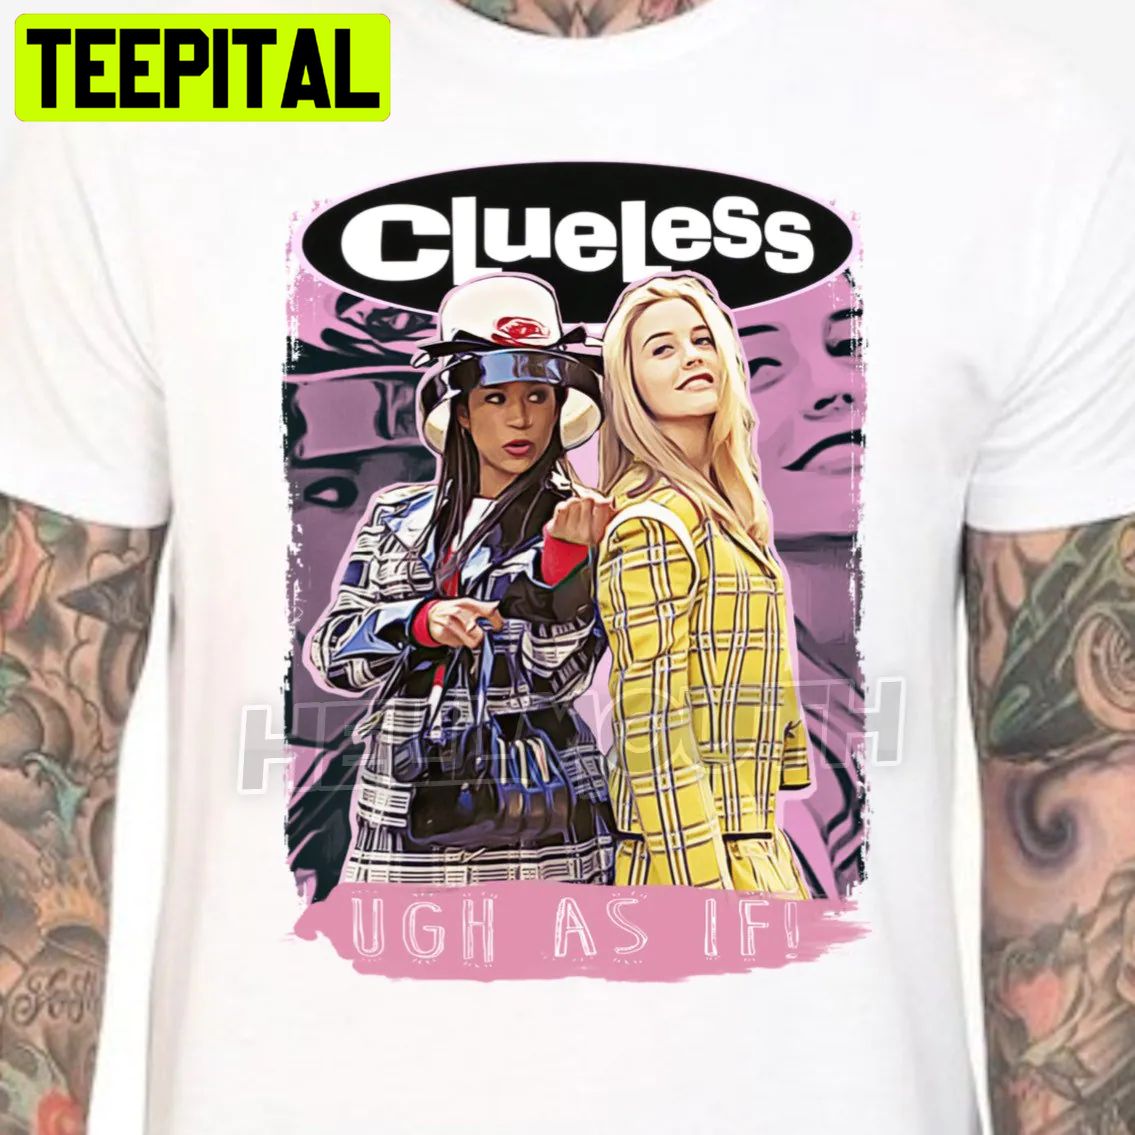 Clueless White Alicia Silverstone Cher Stacey Dash Dionne 90’s Halloween Trending Unsiex T-Shirt